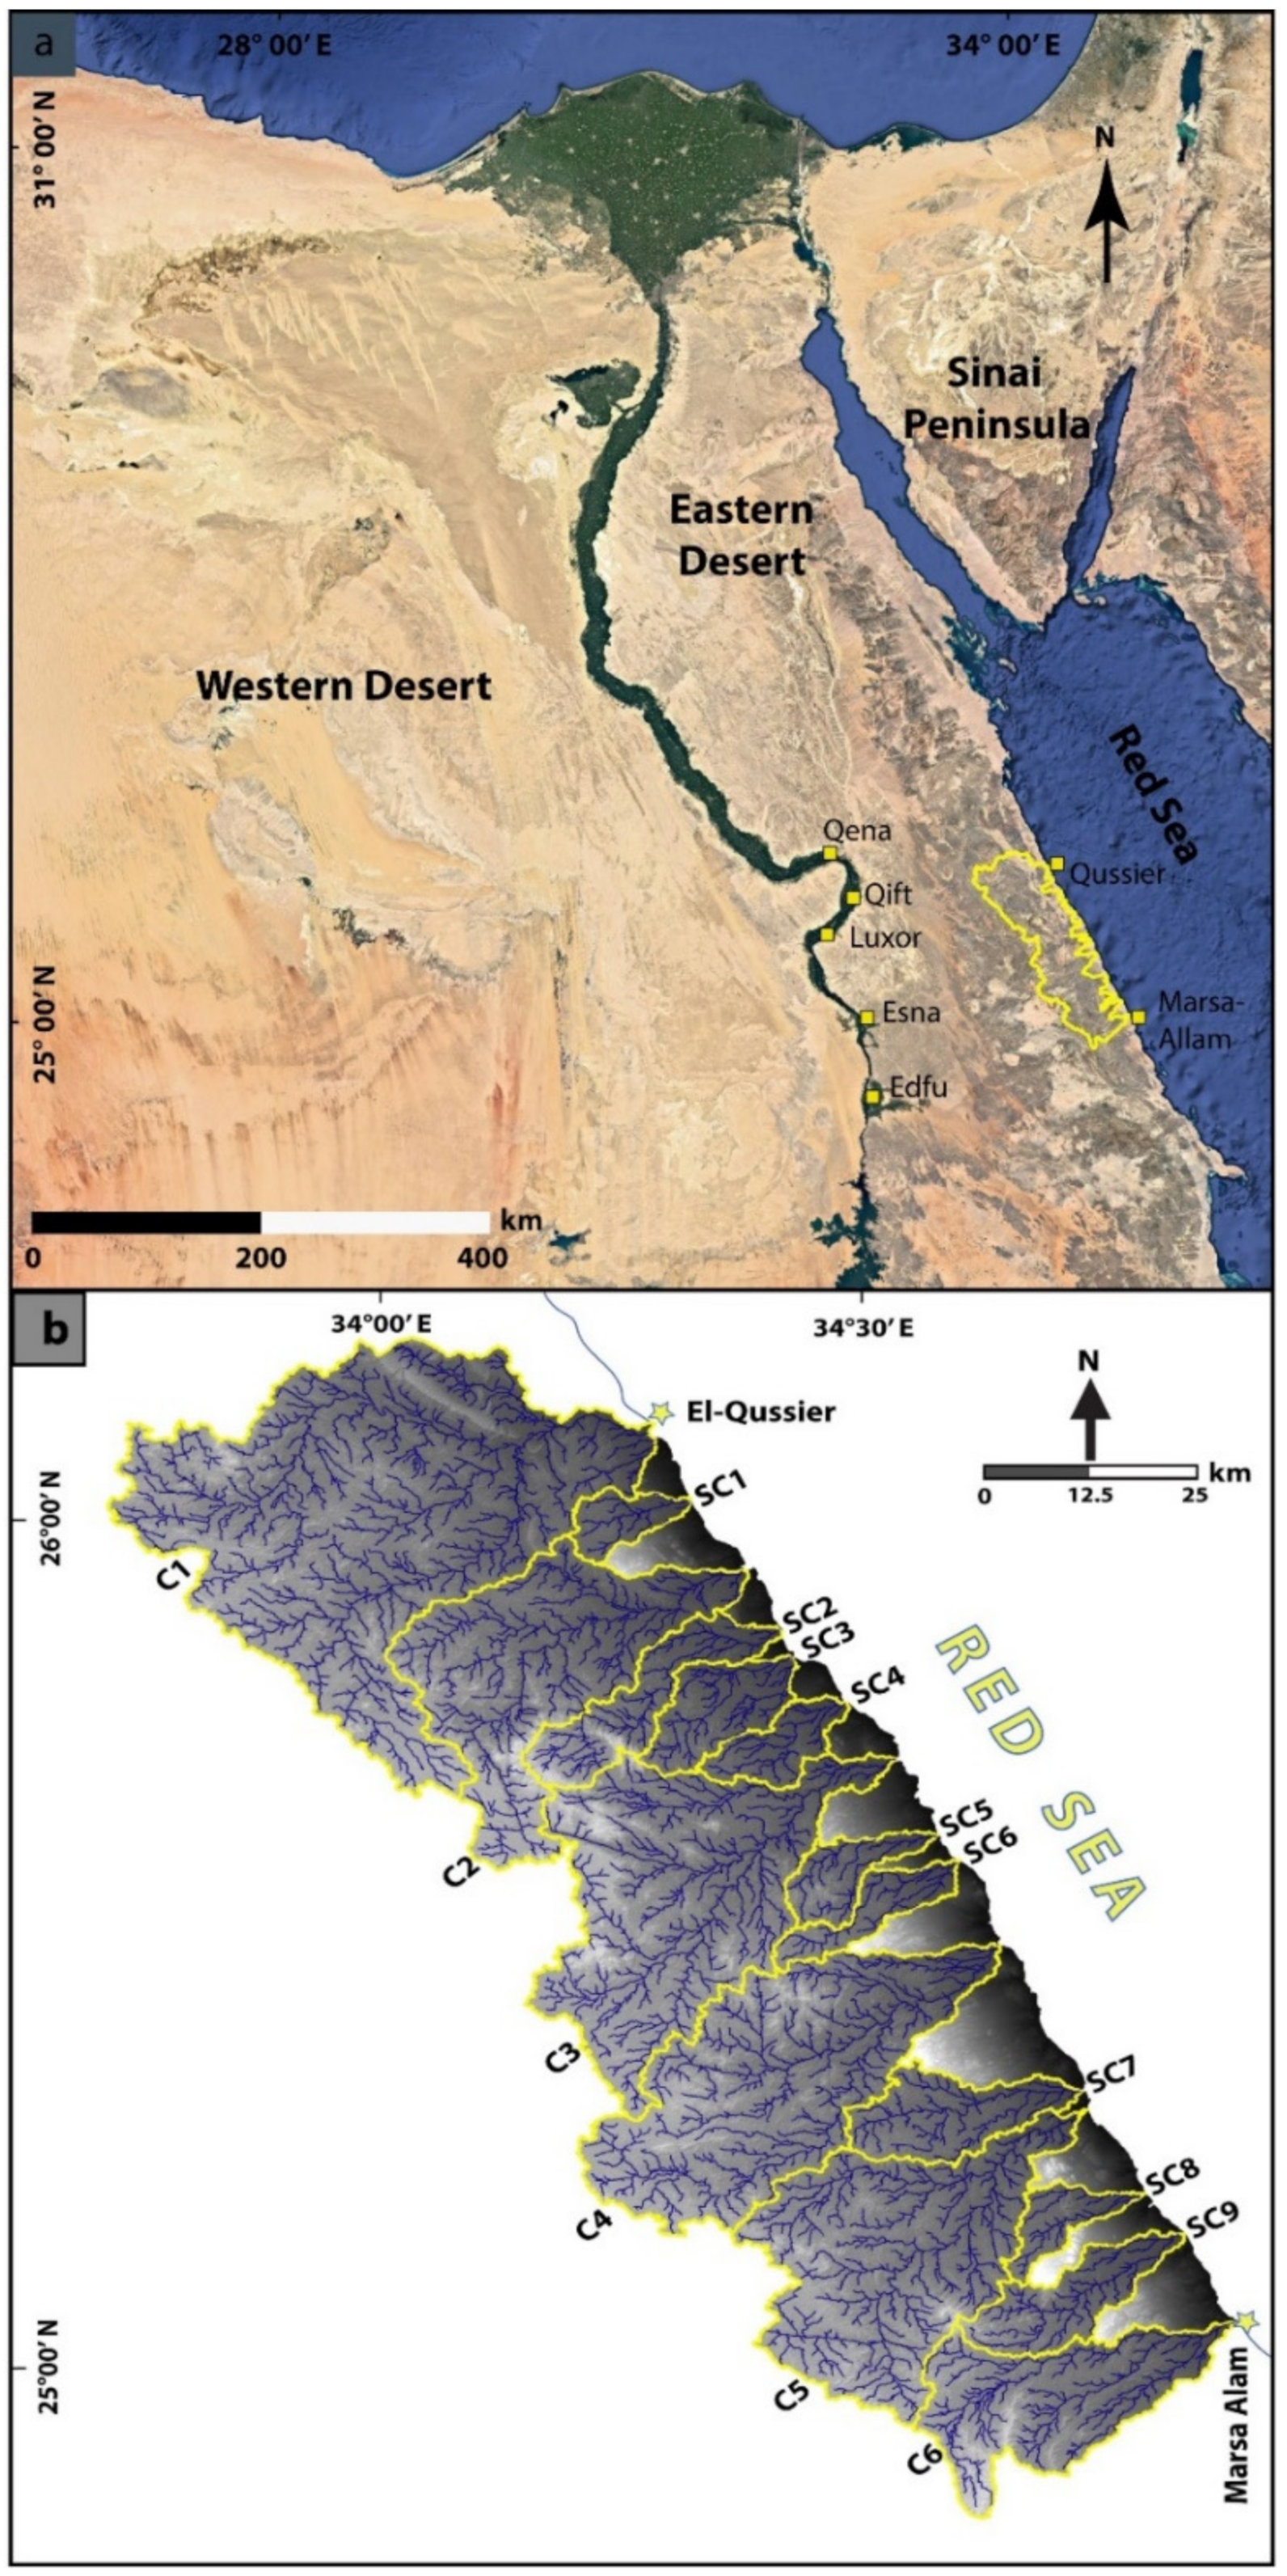 Applied Sciences | Free Full-Text | Morphometric-hydro Characterization of  the Coastal Line between El-Qussier and Marsa-Alam, Egypt: Preliminary  Flood Risk Signatures